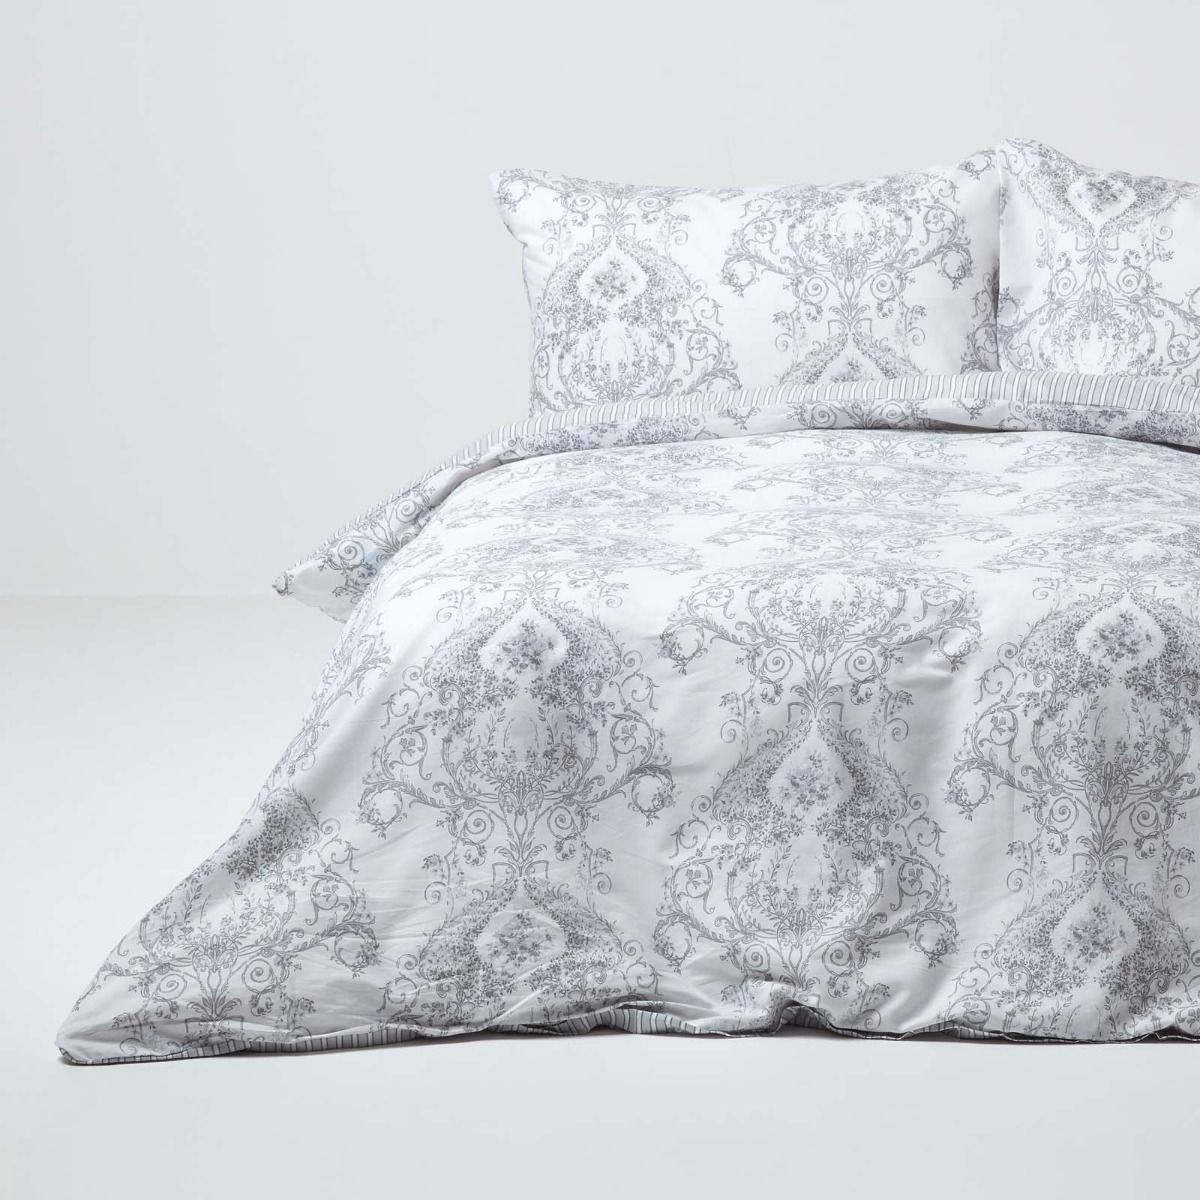 Grey French Toile Patterned Duvet Cover Set, French Duvet Covers